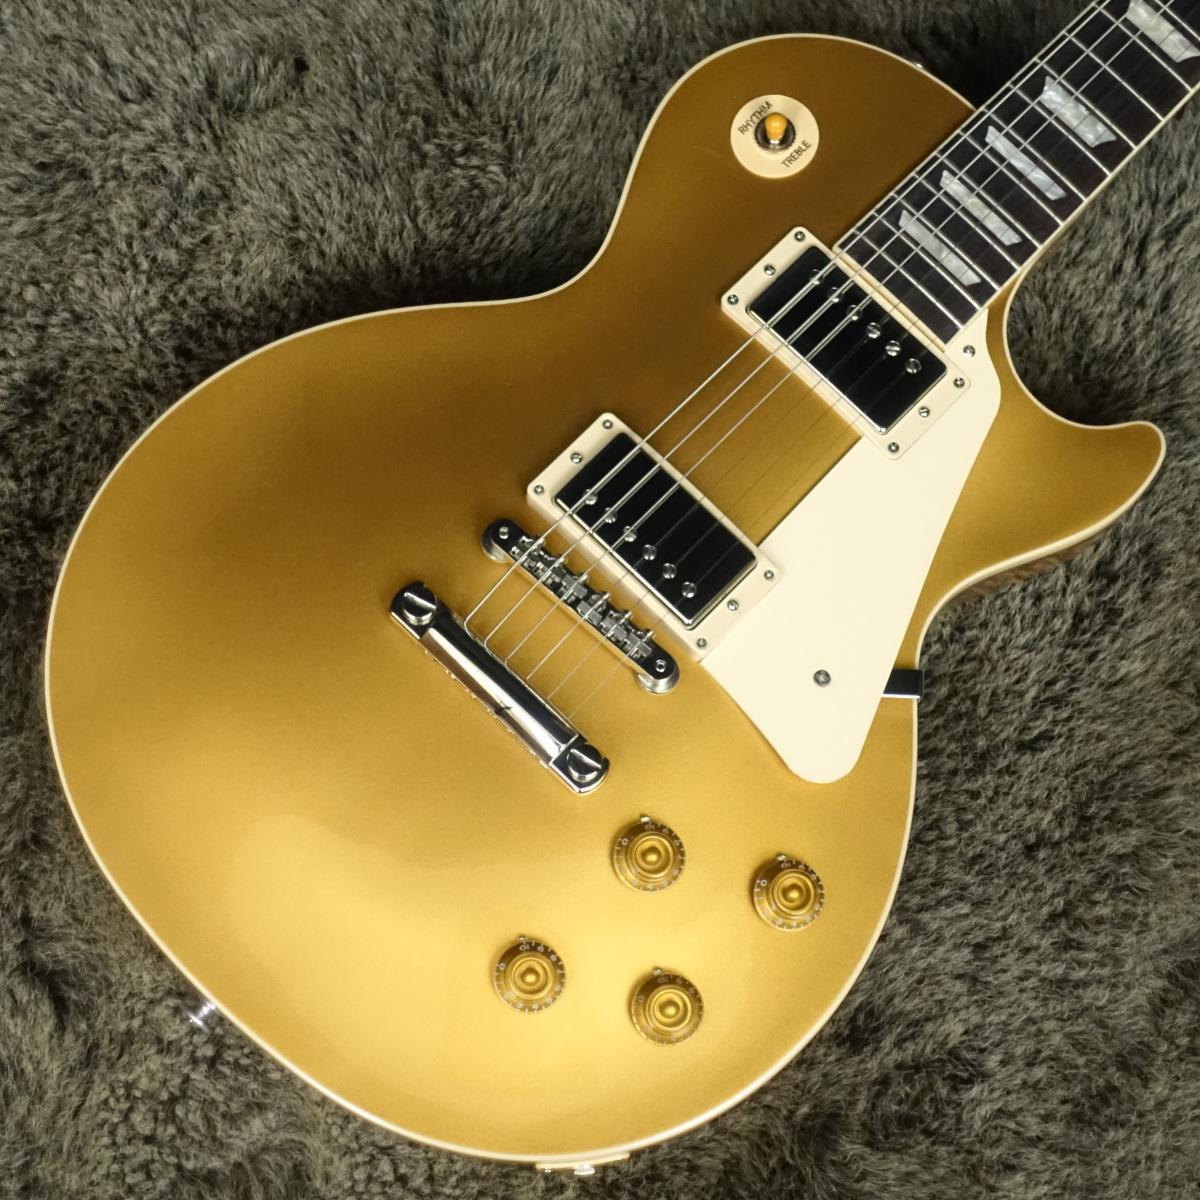 Gibson ＜ギブソン＞ Les Paul Standard '50s Gold Top の商品詳細